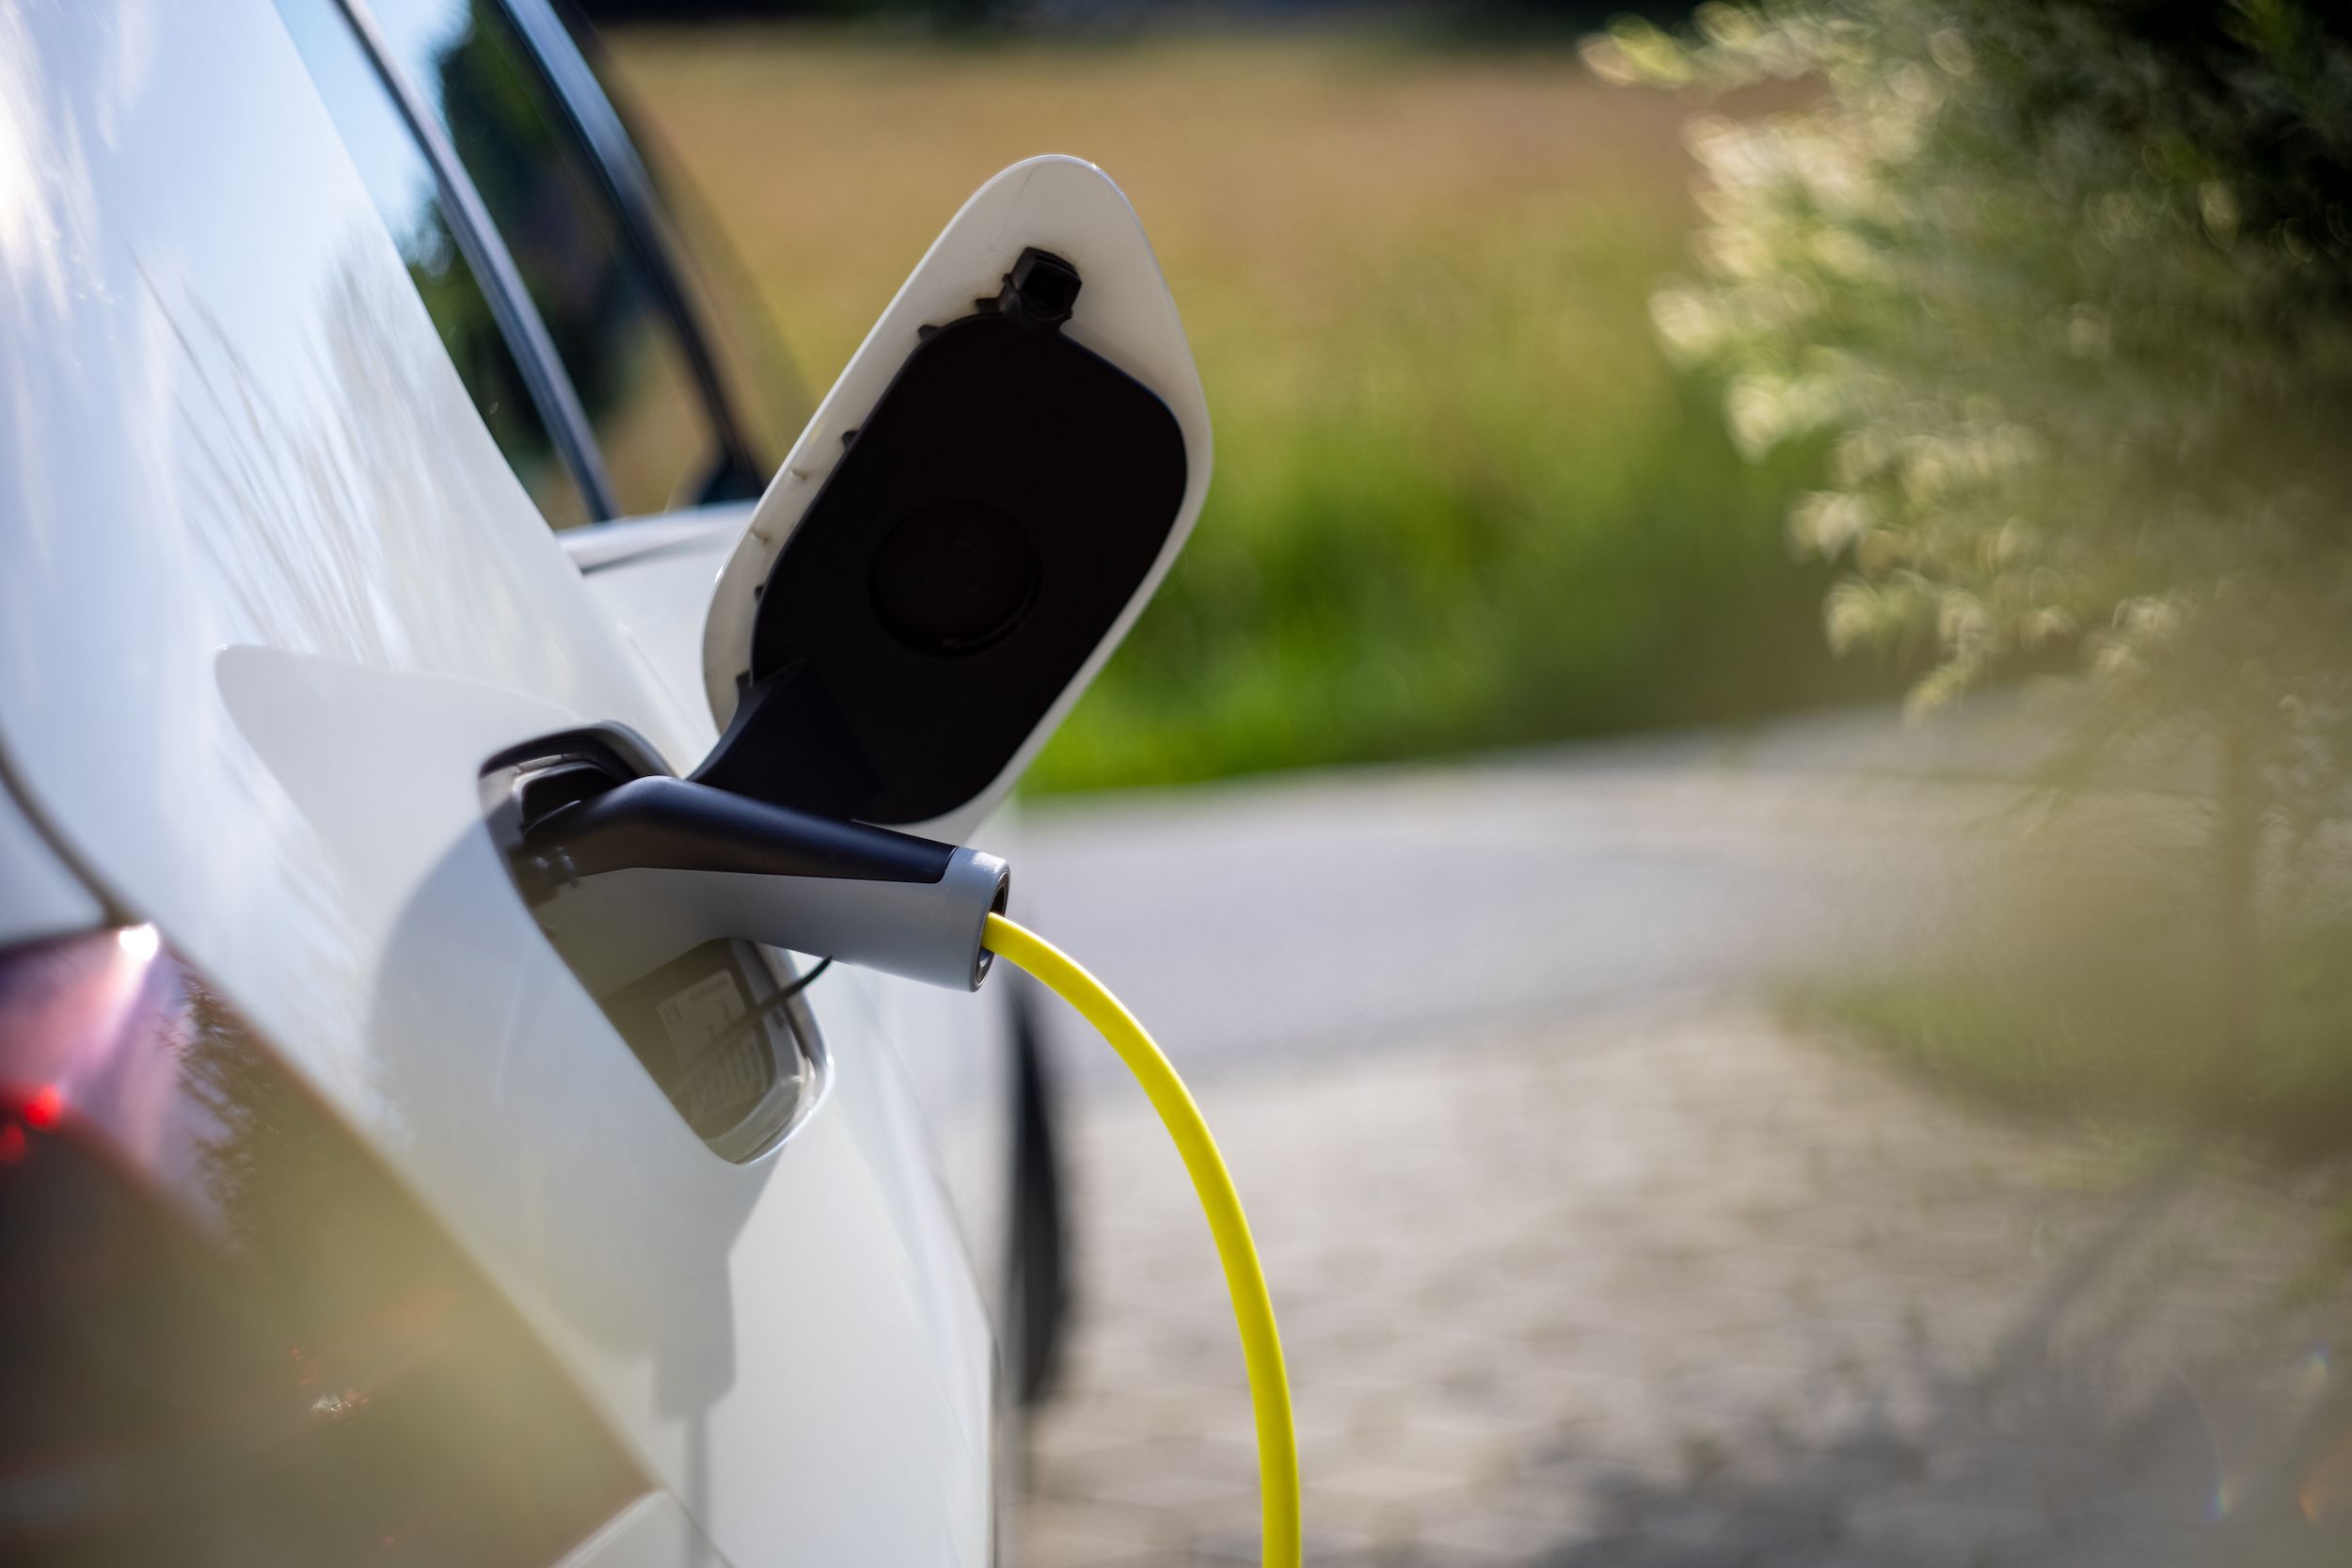 U.S. Highways To Get 500,000 Electric Vehicle Charging Stations - IEEE  Innovation at Work